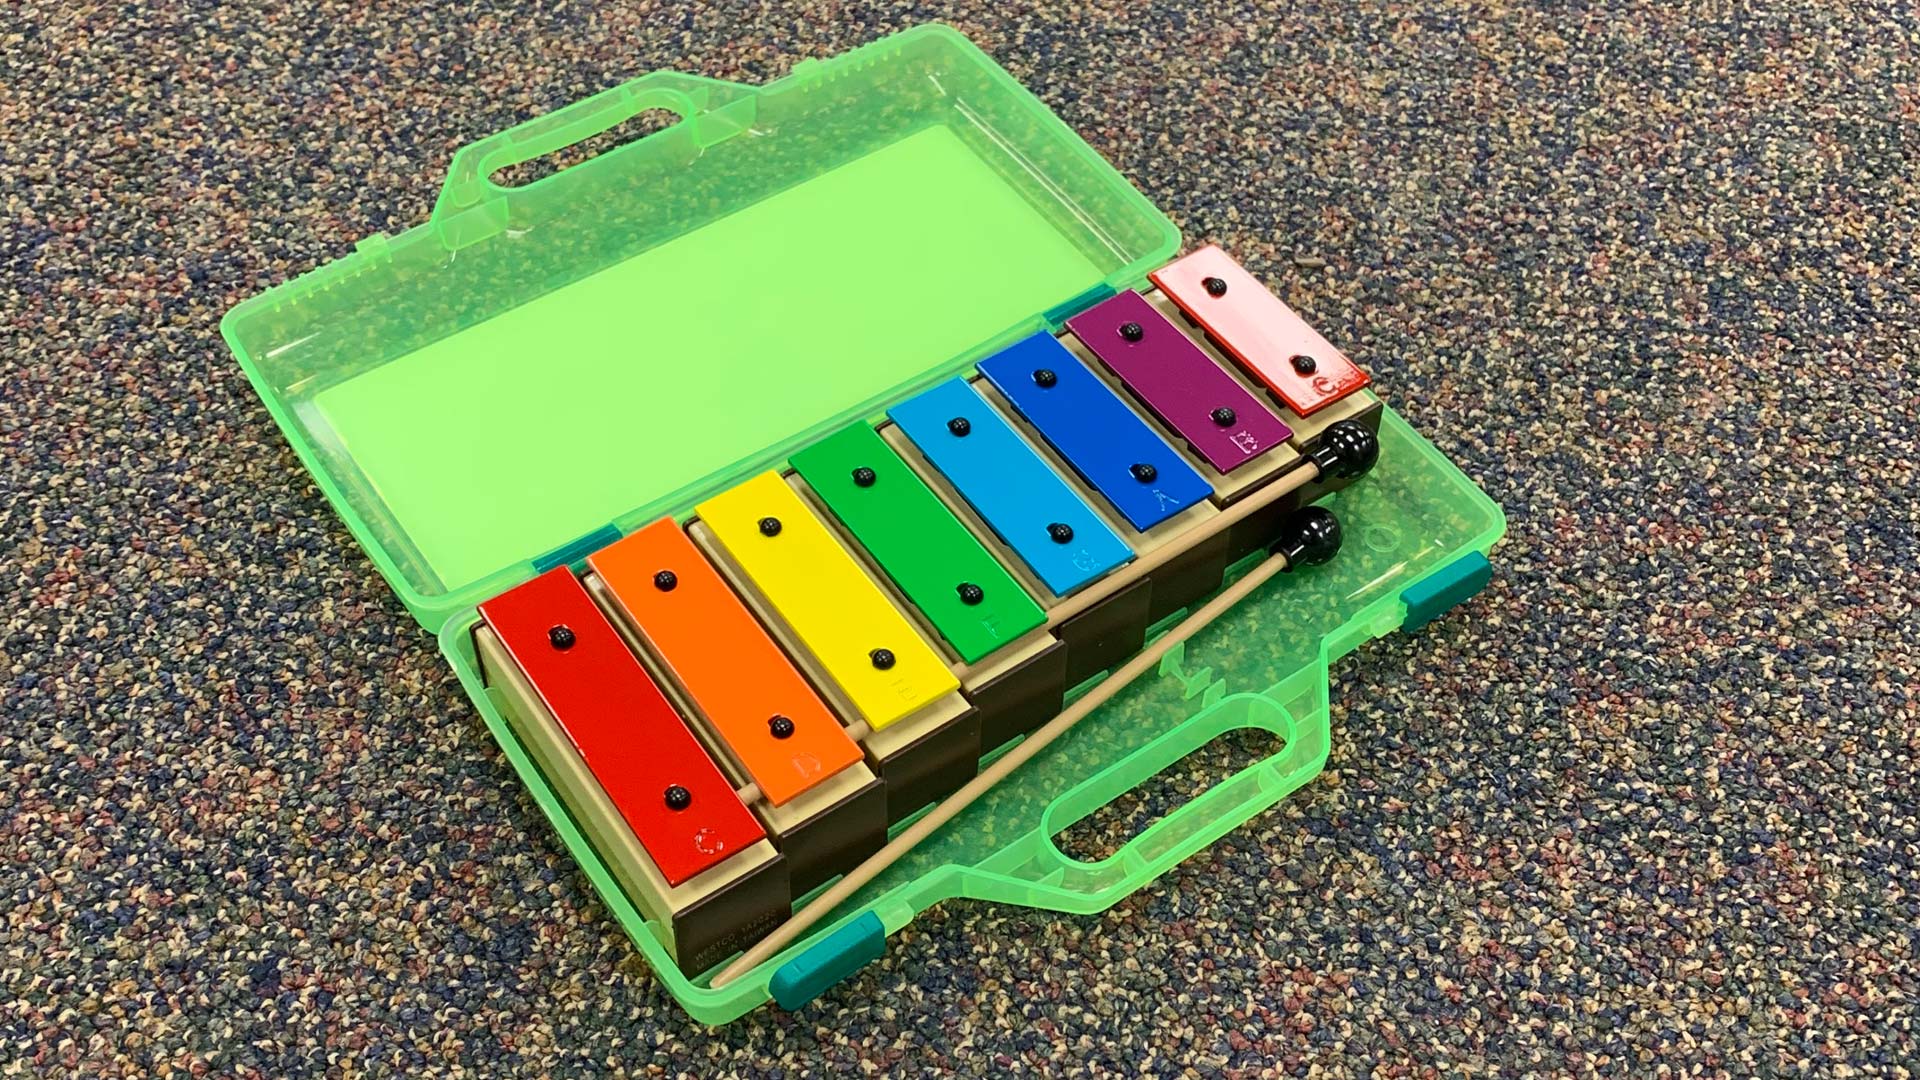 Elementary School Music Program with Xylophones to Foster the Love of Music